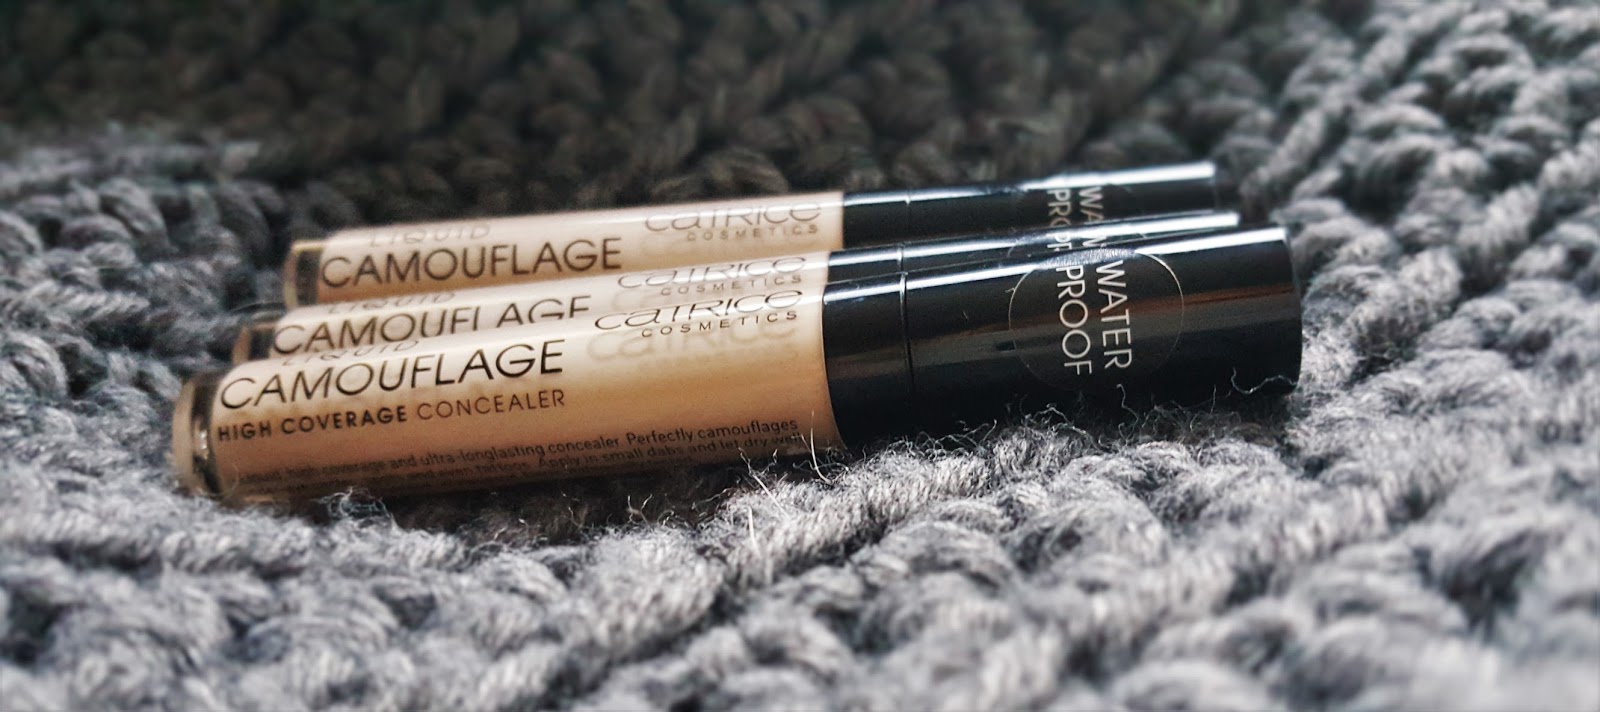 Catrice Liquid Camouflage High Coverage Concealer. - Livelivethings